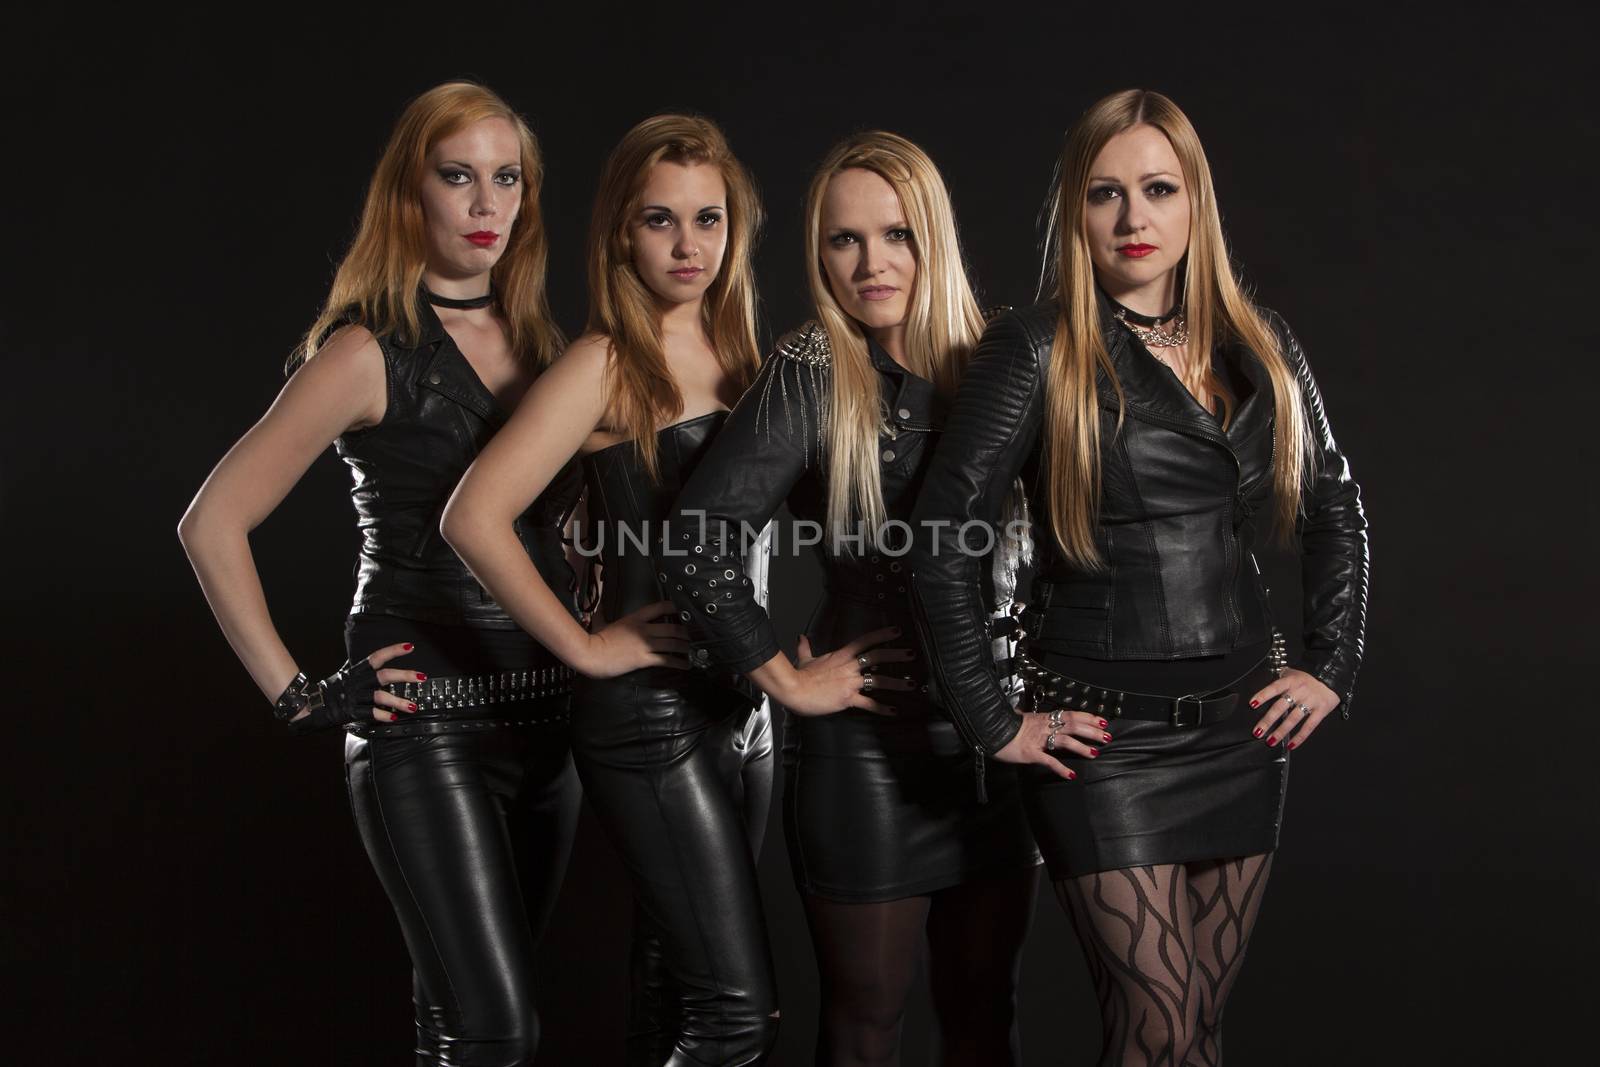 Group of young women wearing leather outfits by Aarstudio